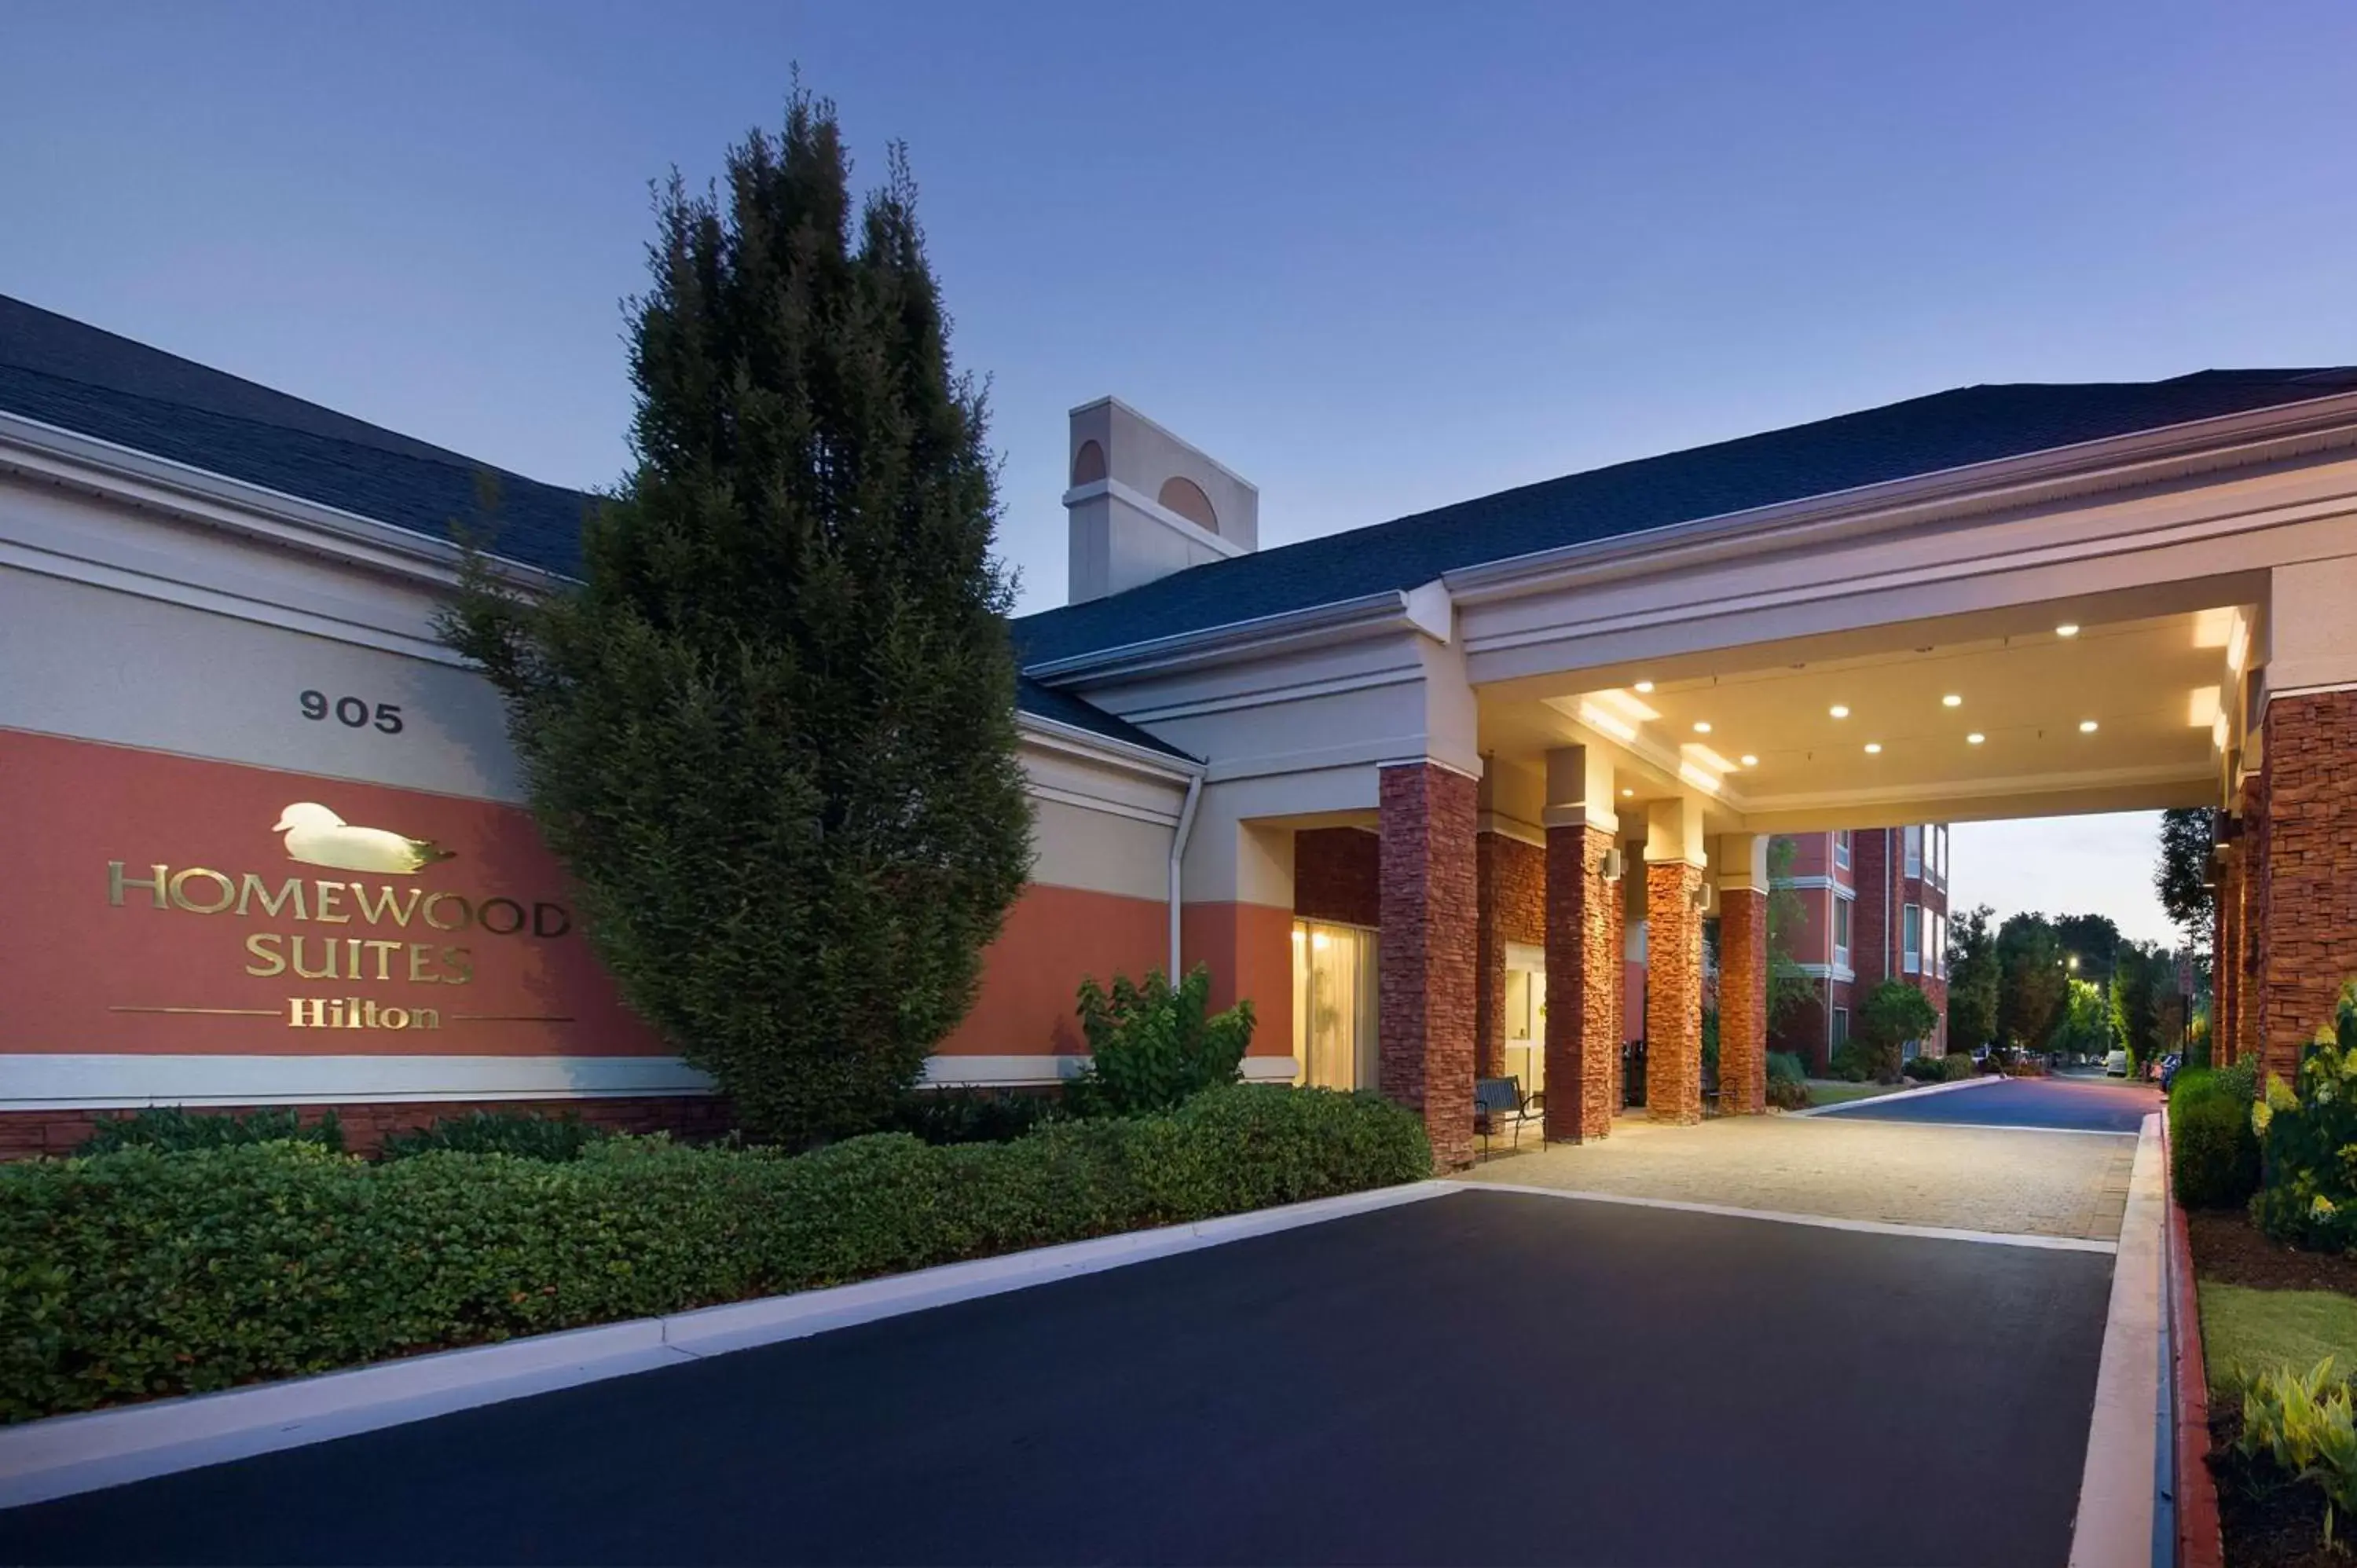 Property Building in Homewood Suites by Hilton Atlanta NW/Kennesaw-Town Center